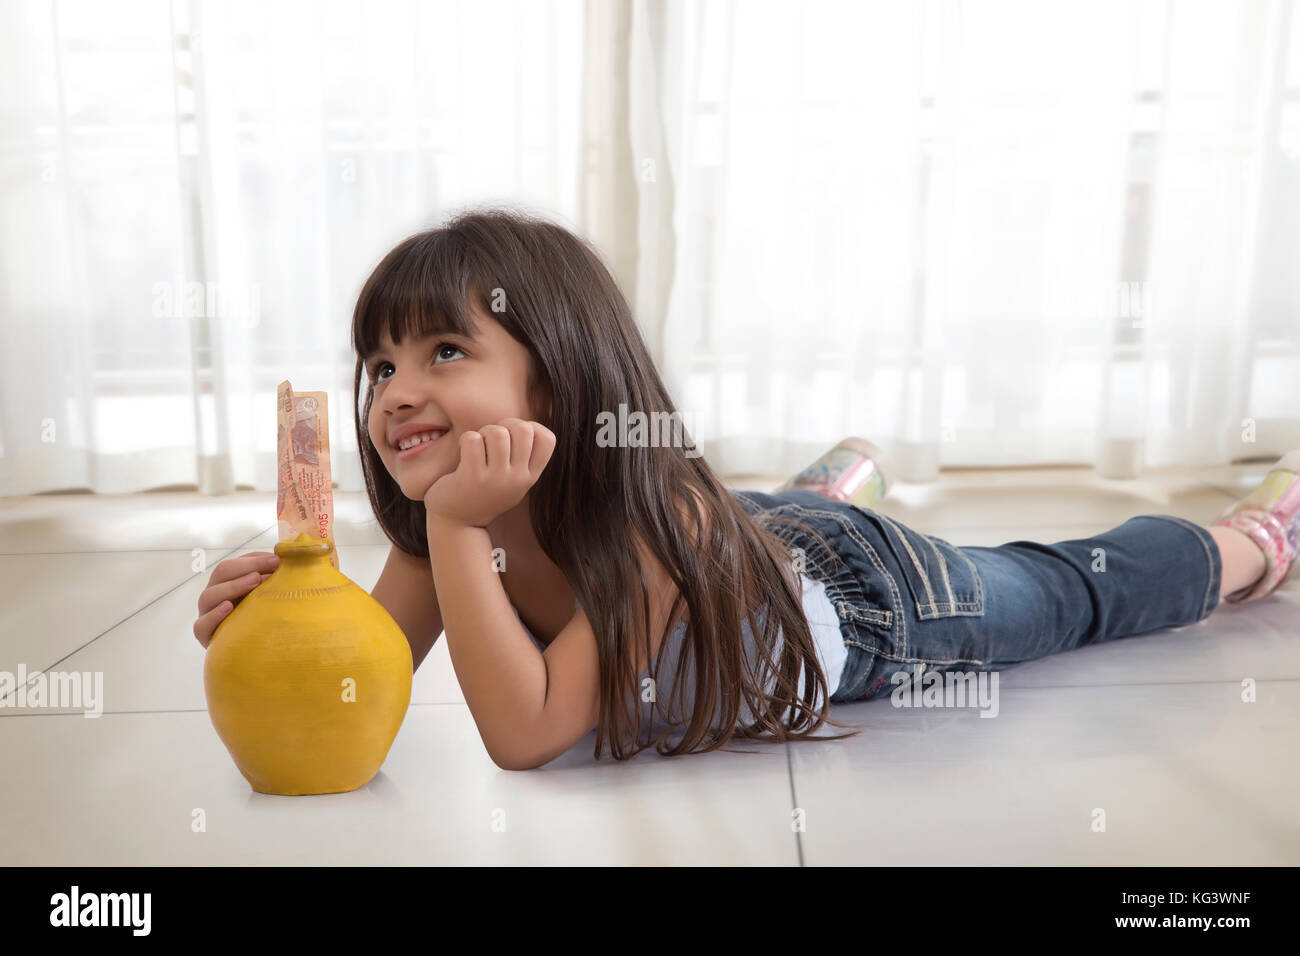 Little girl thinking lying on floor with piggy bank Stock Photo